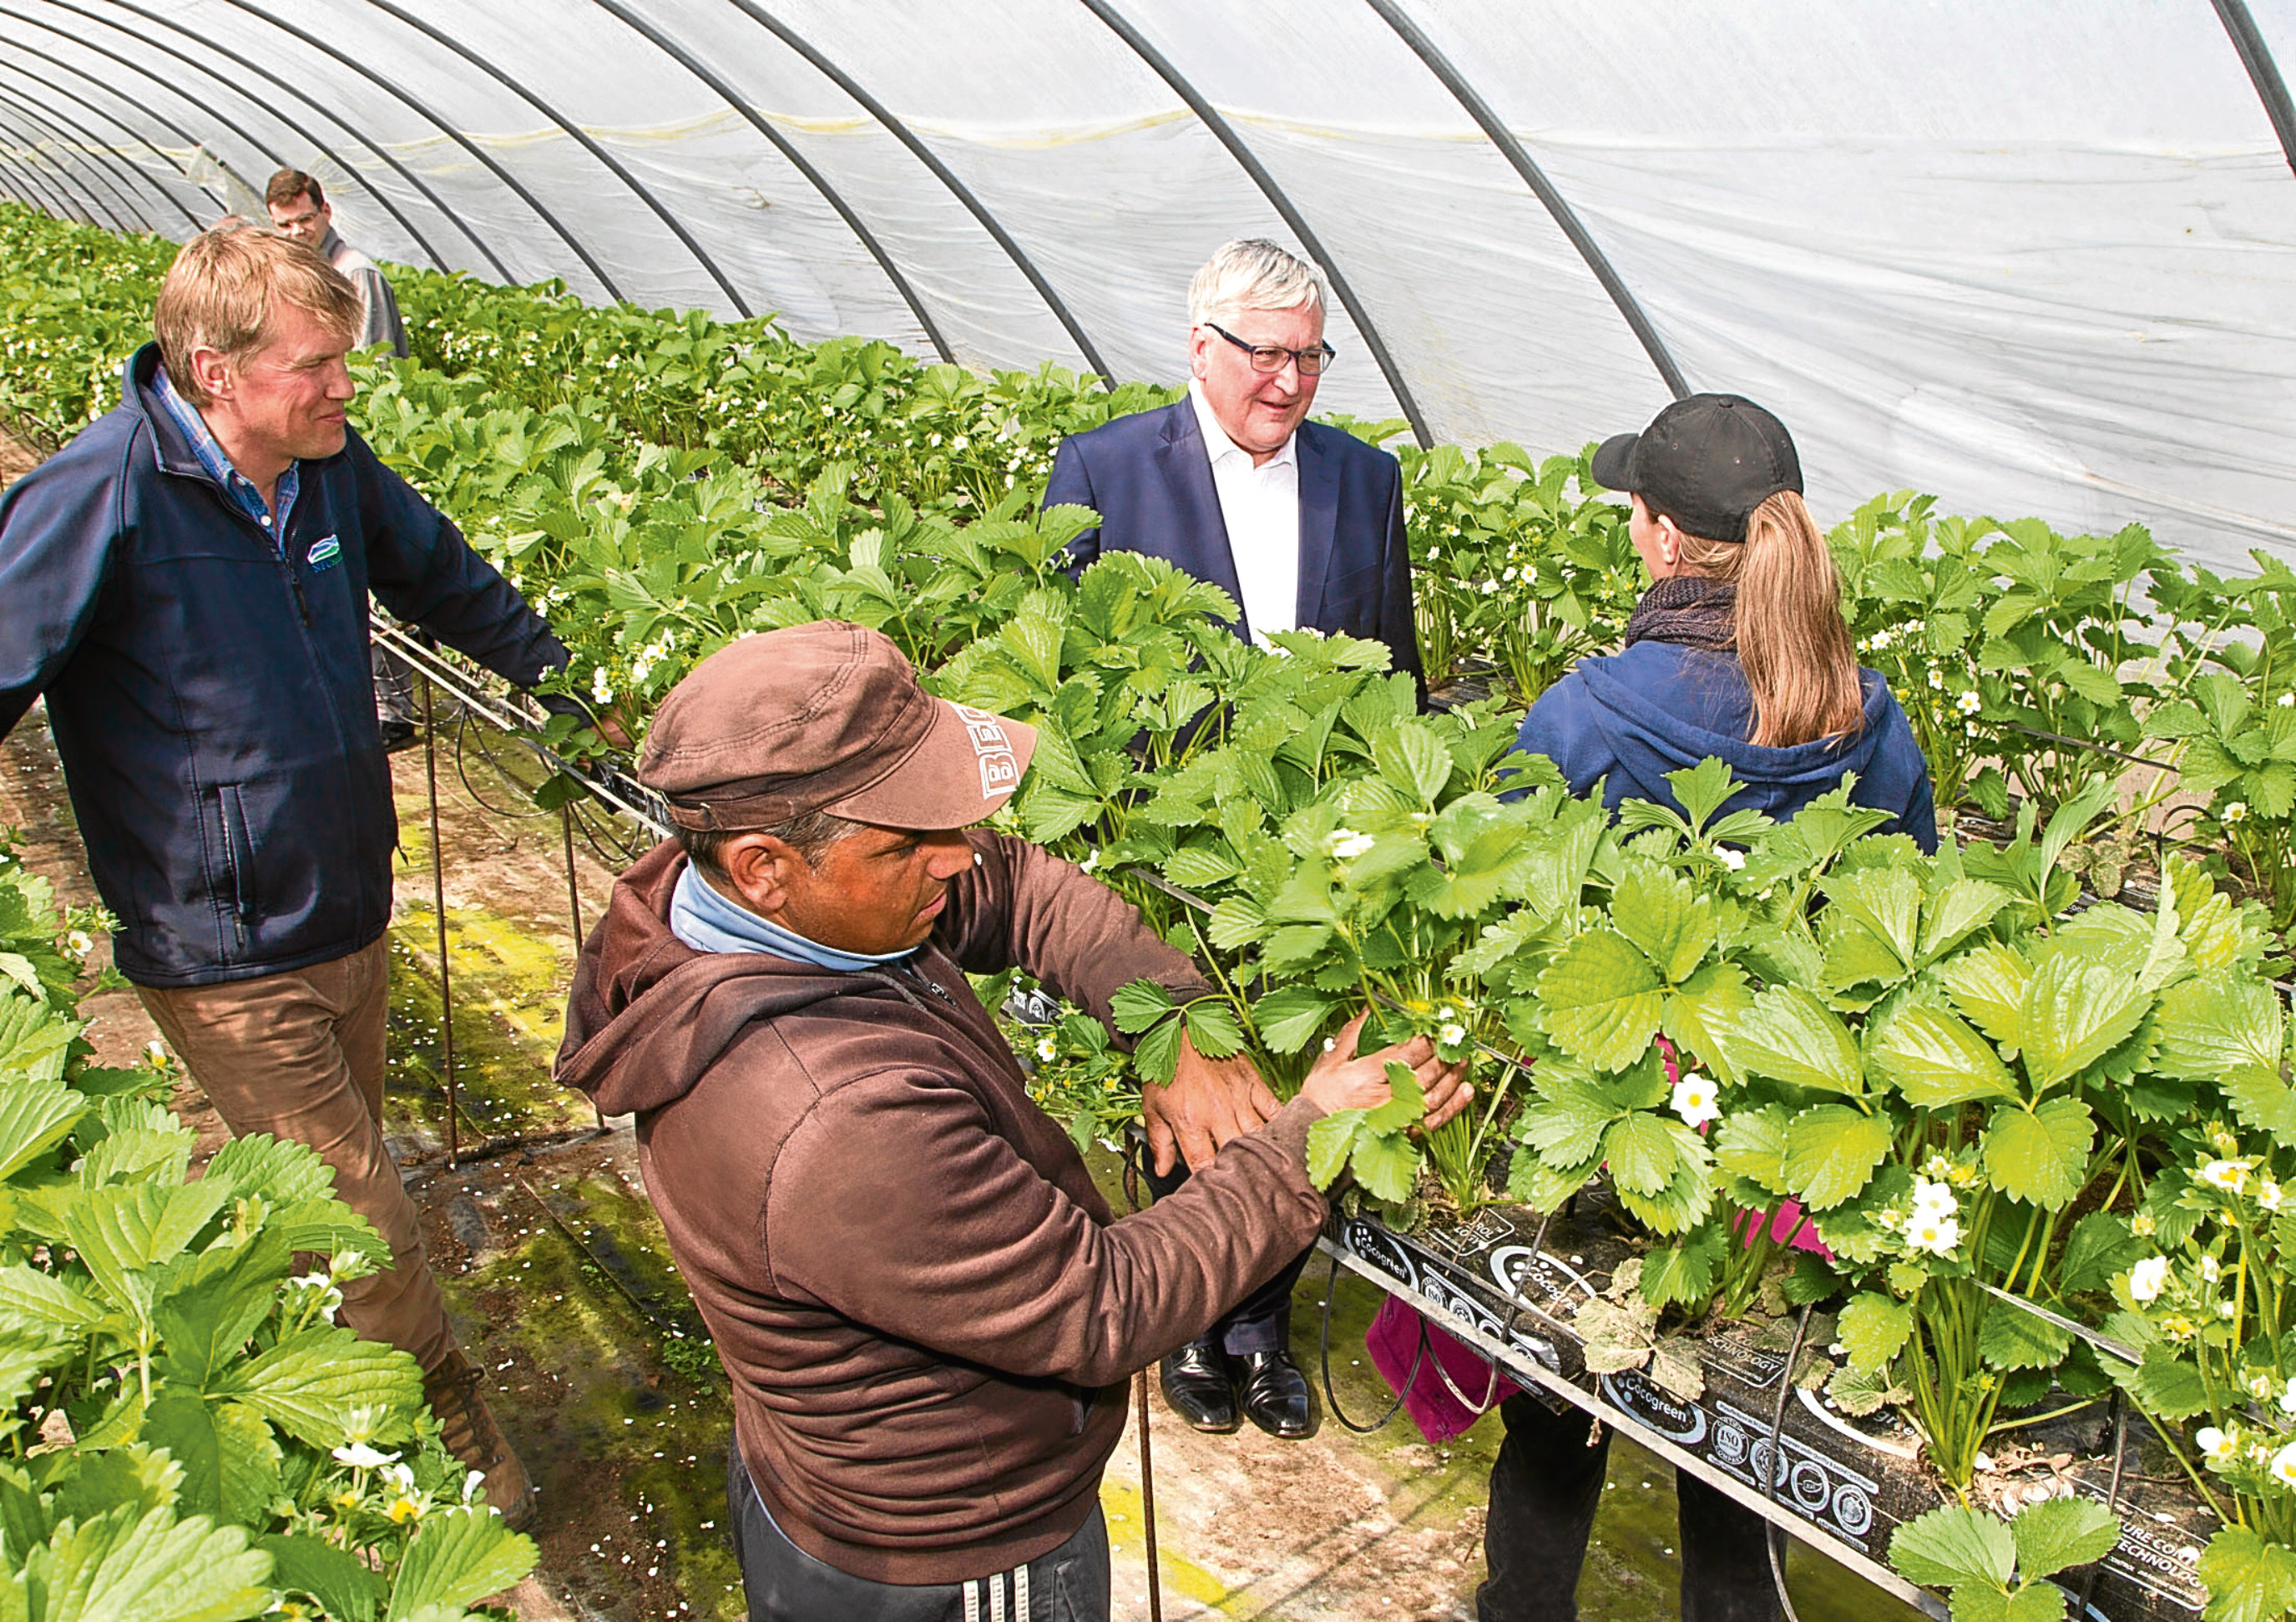 Rural Secretary Fergus Ewing is visiting fruit farms at East Scryne and Auchrennie near Carnoustie to discuss the impact of Brexit  on the seasonal non-UK workforce....pic shows Fergus Ewing (2nd from right) chatting to a worker with fruit farmer James Porter (left)...pic Paul Reid